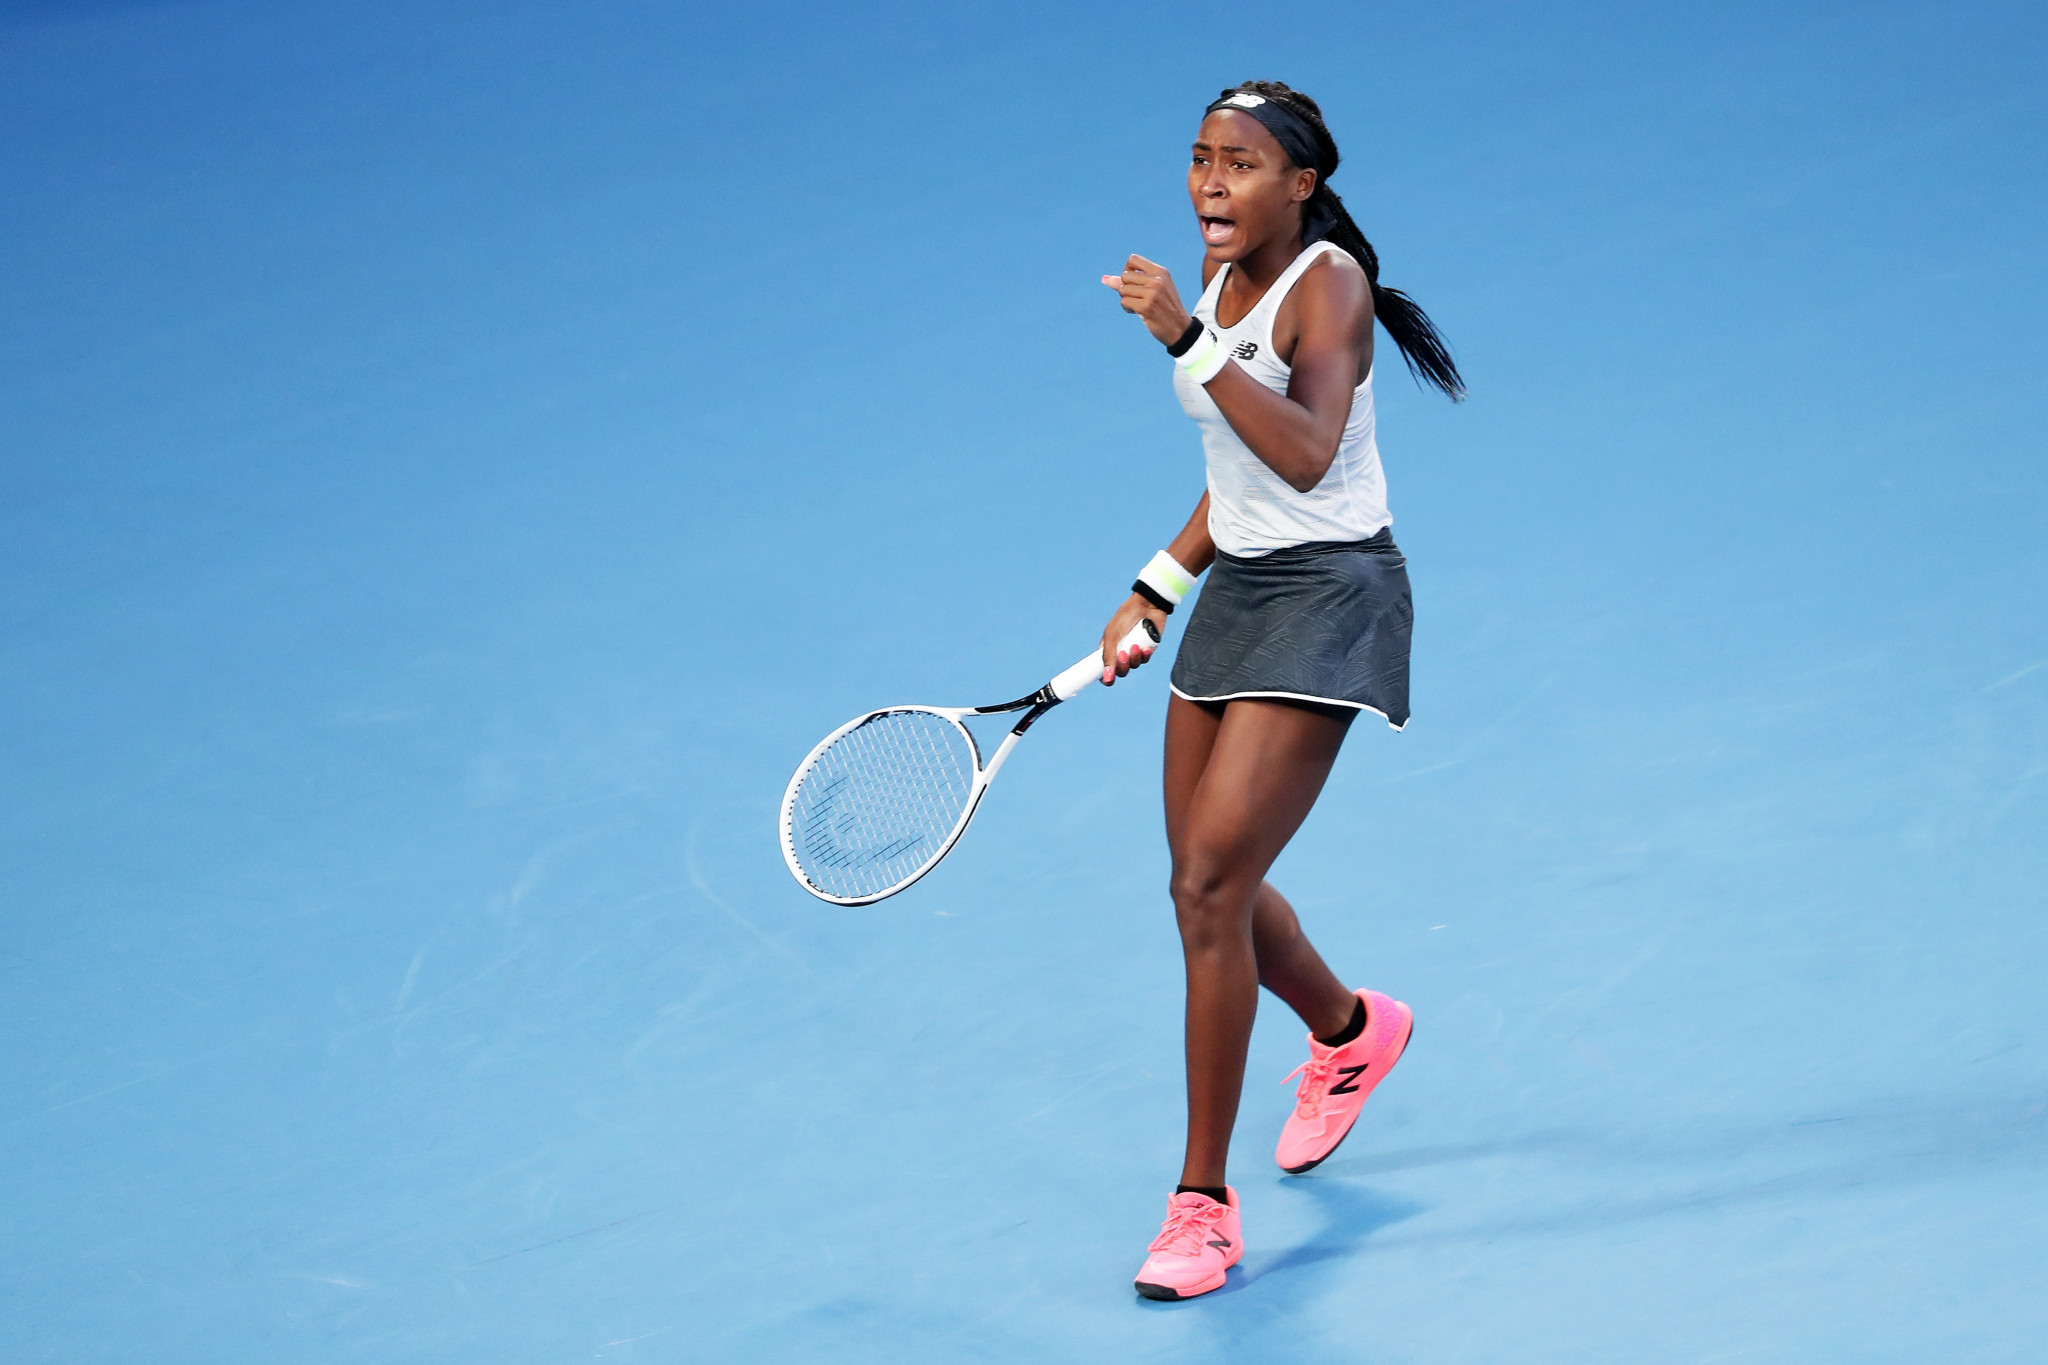 The 15-year-old Gauff was the victor, triumphing 6-3, 6-4 ©Getty Images